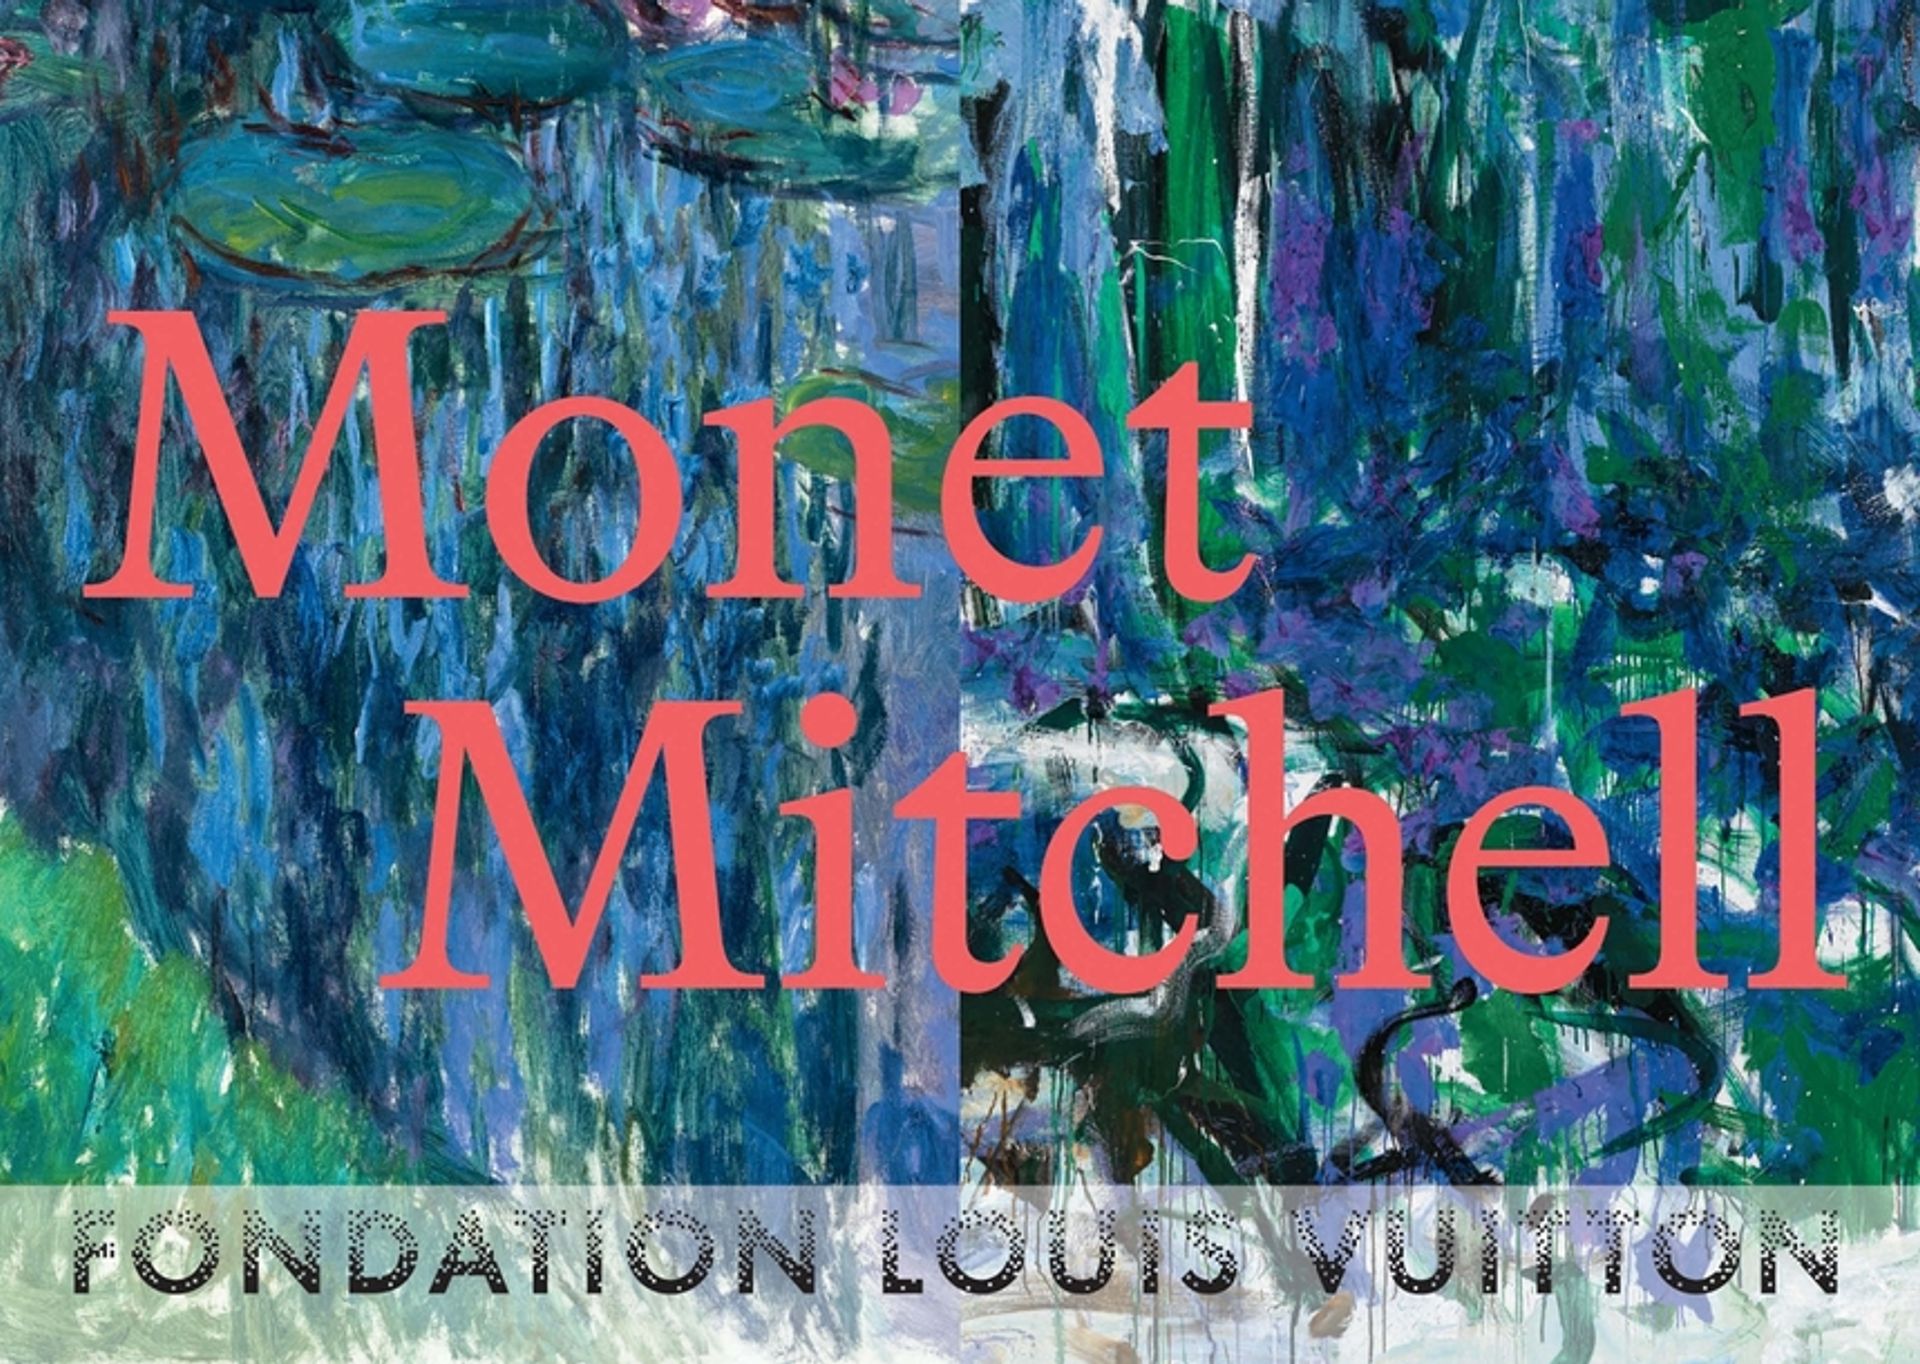 Monet Mitchell, collectif, éditions Hazan, 240 pages, 39,95 euros.